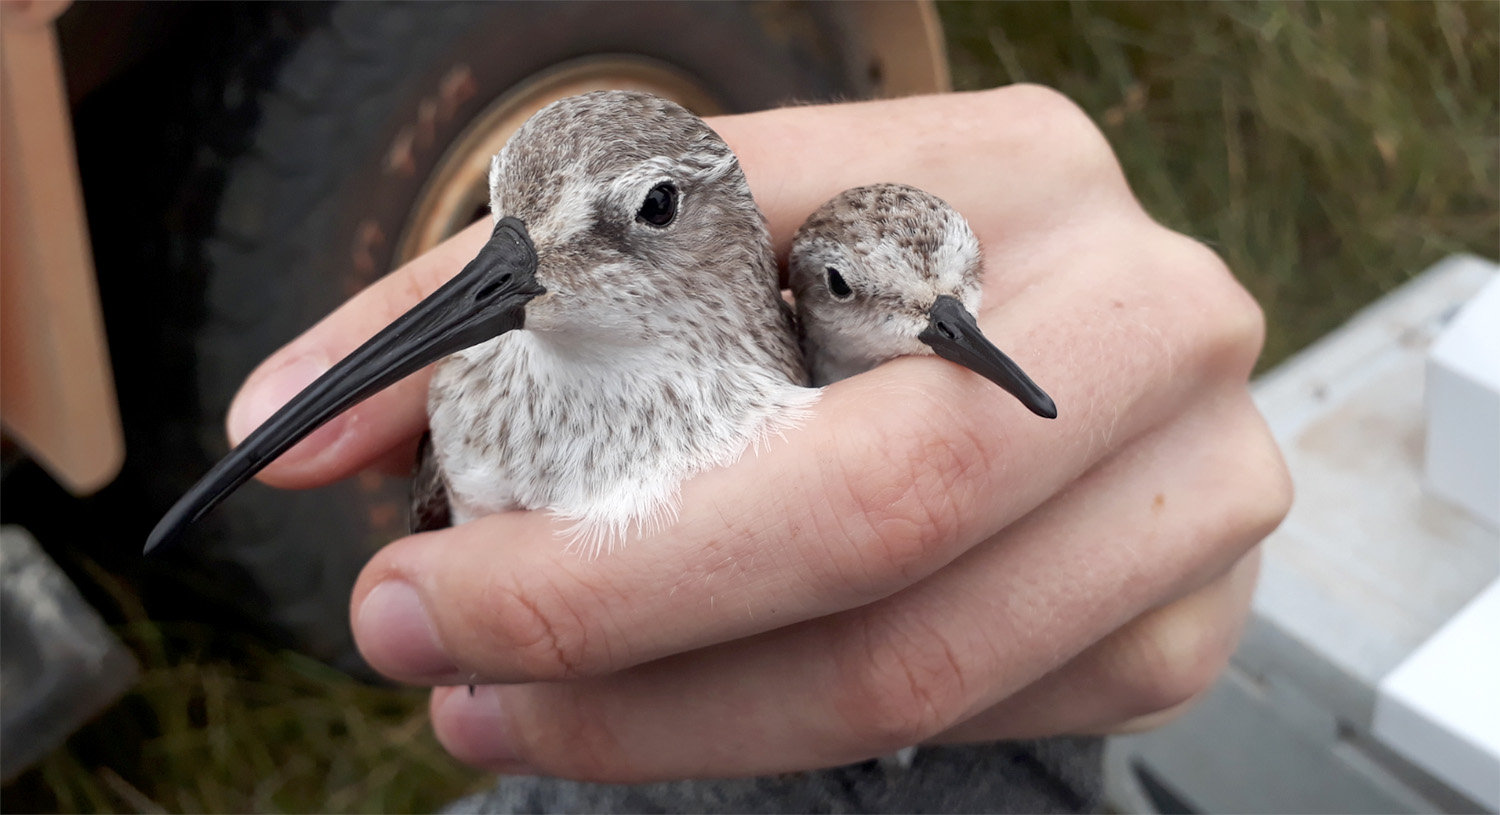 A photo of two shorebirds in a human hand.